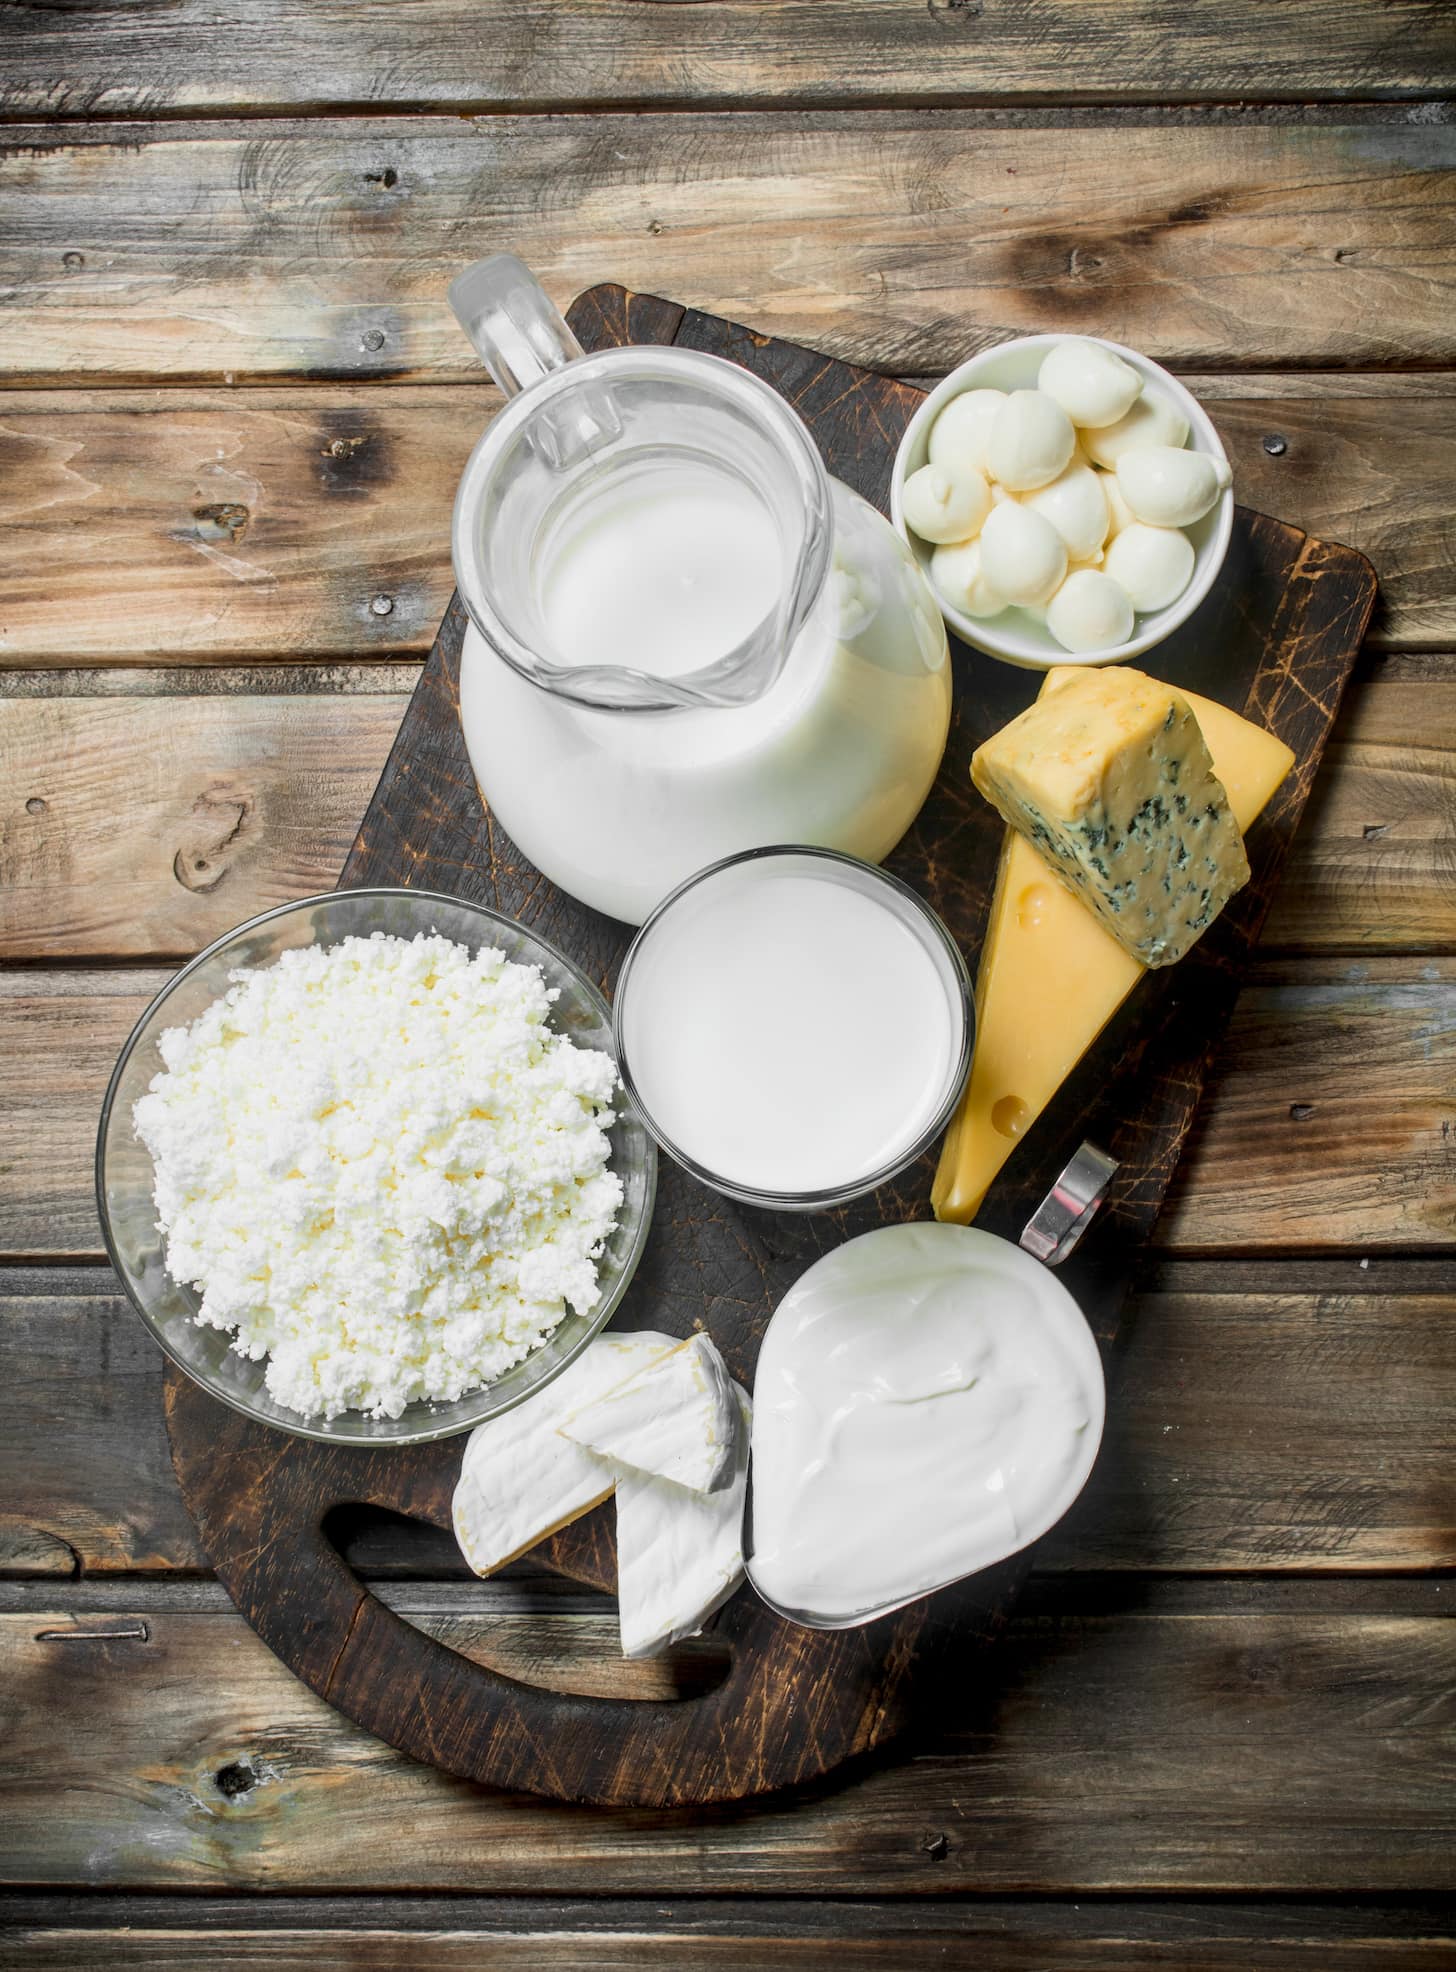 Variety of fresh dairy products. On a wooden background.